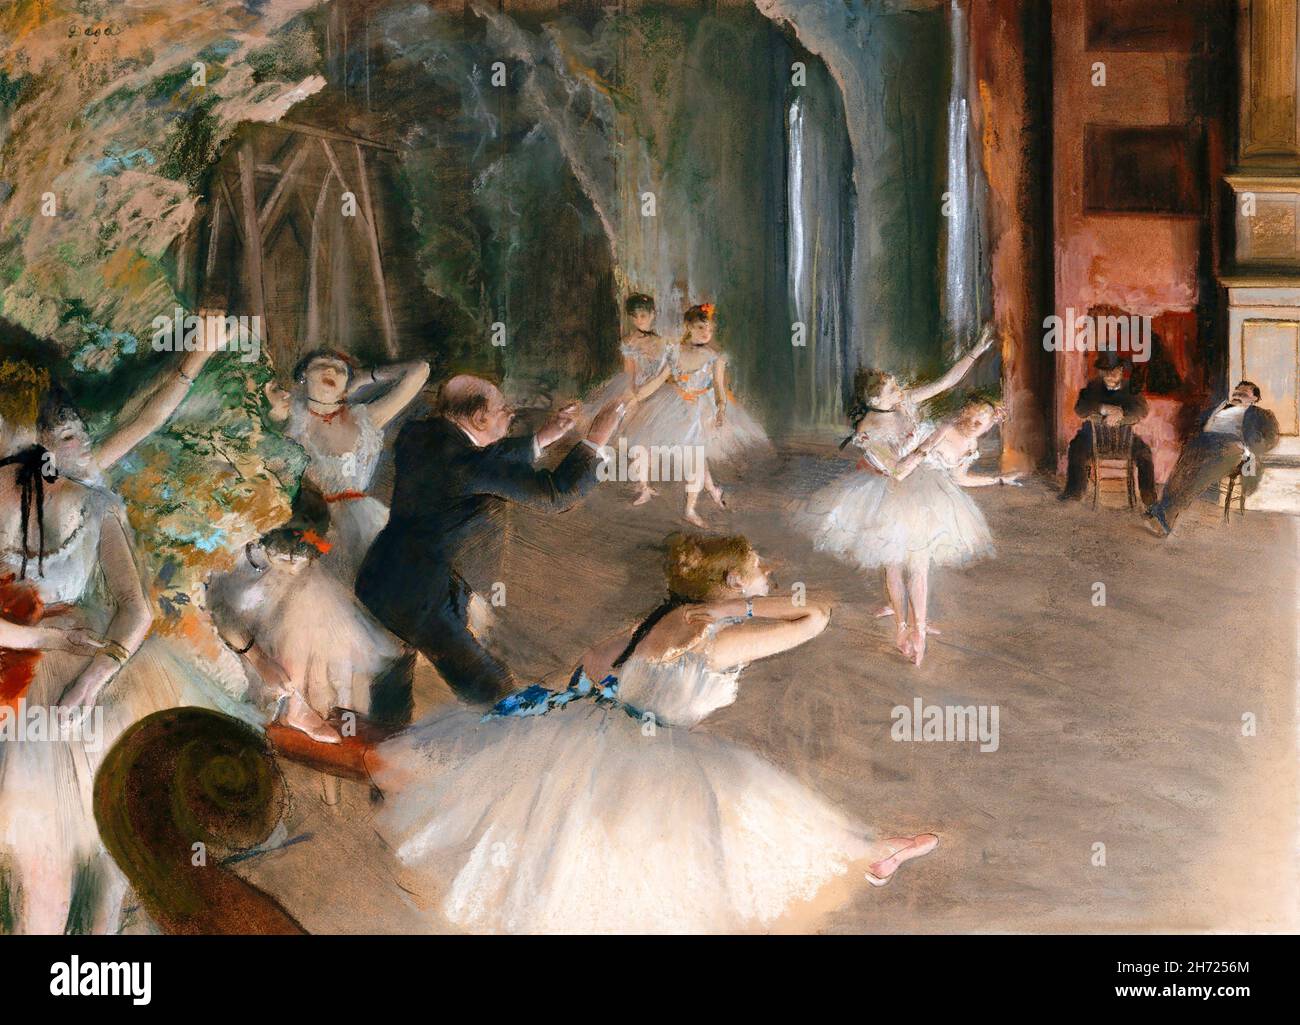 Degas. Painting entitled 'The Rehearsal Onstage' by Edgar Degas (1834-1917), Pastel over brush-and-ink drawing on thin cream-colored wove paper, c. 1874 Stock Photo